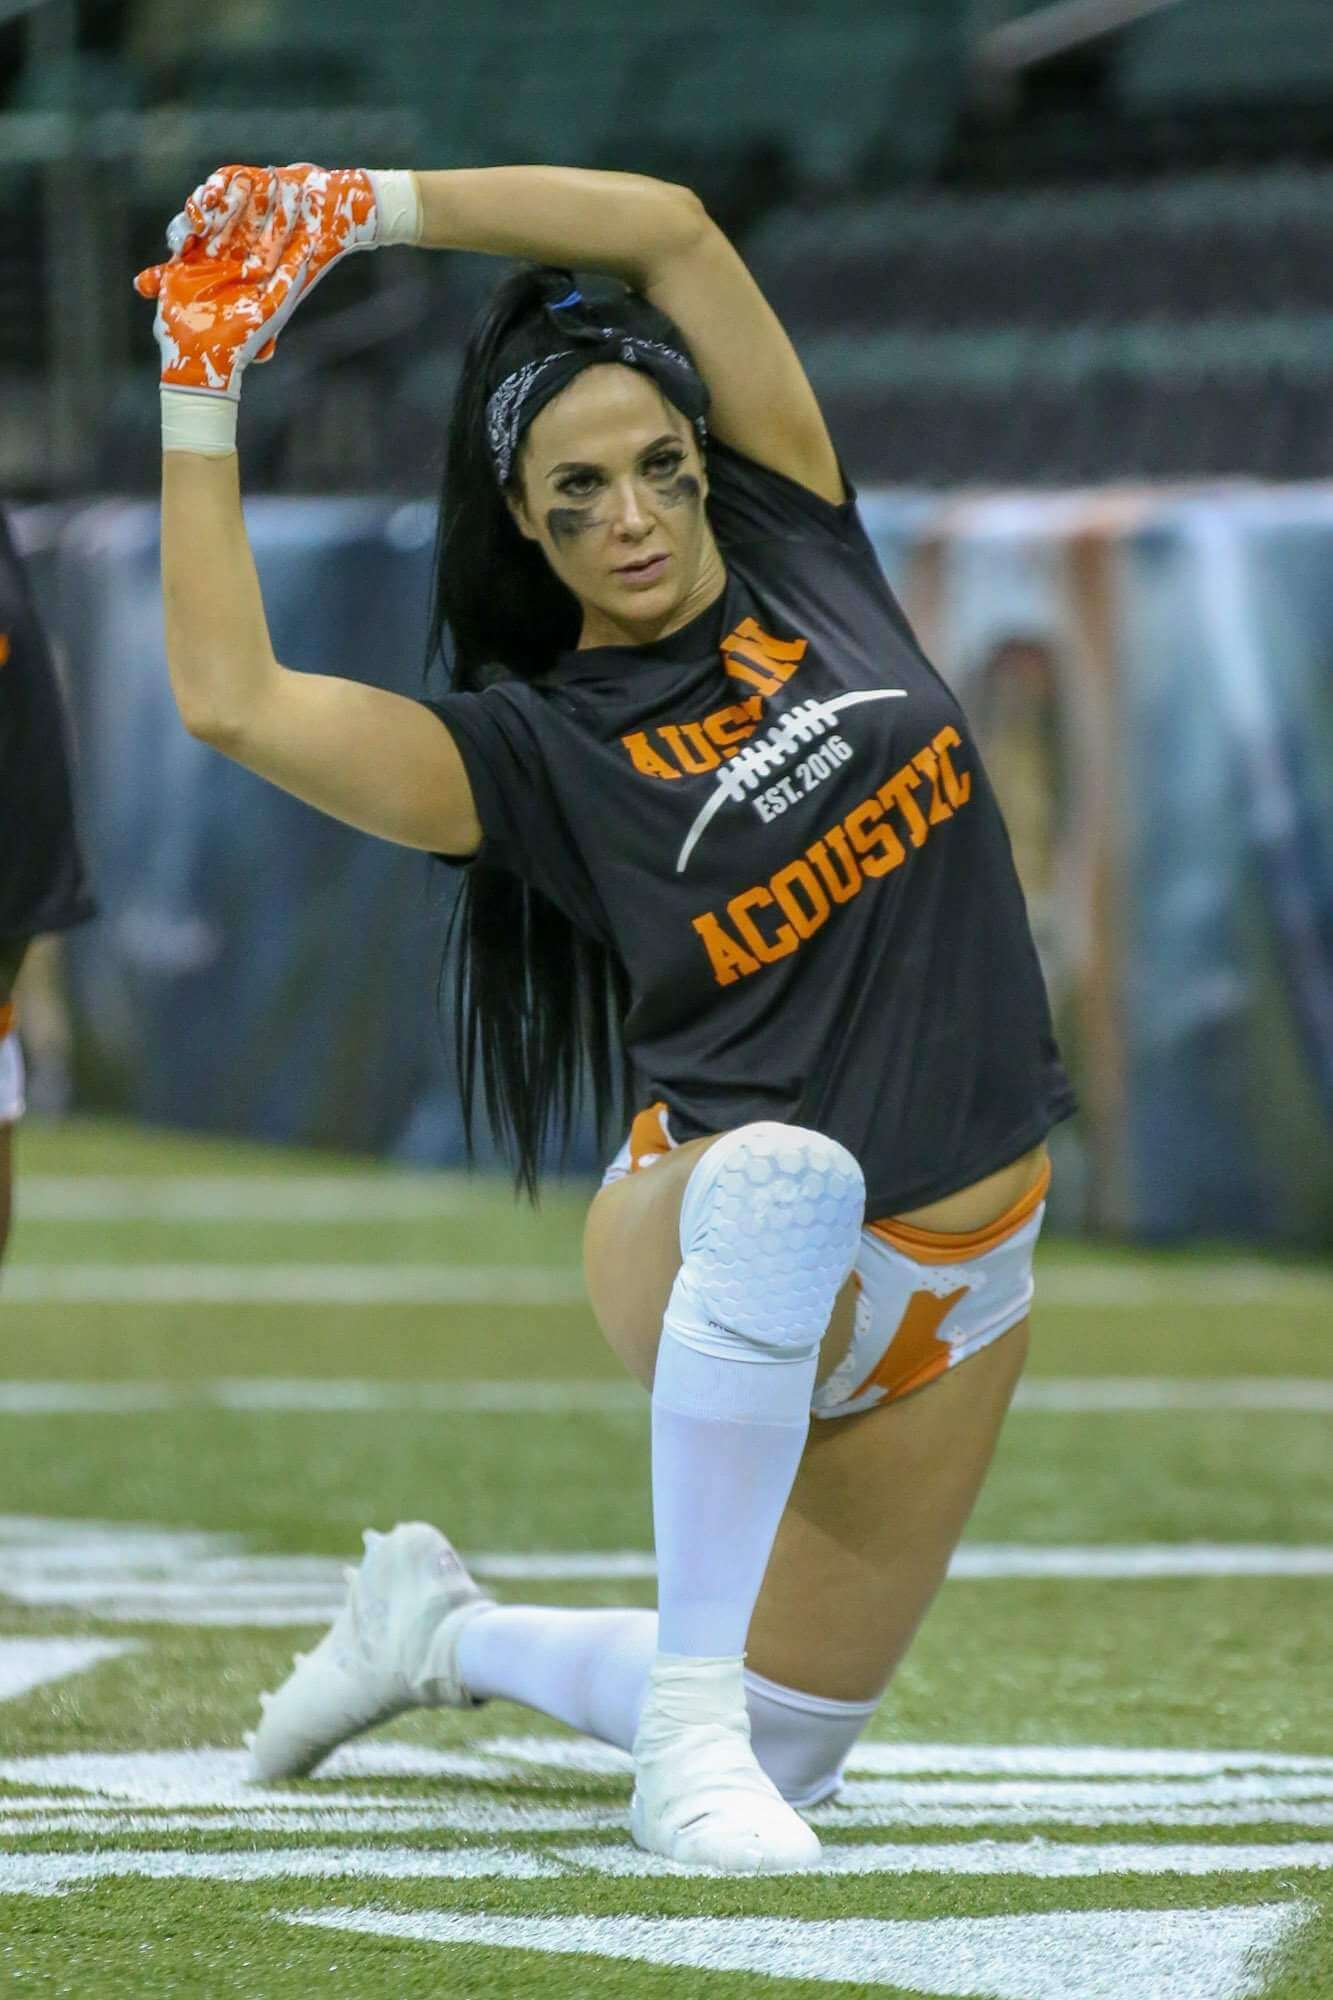 The Legends Football League Beautiful Women And Football, Need We Say Anymore! 33